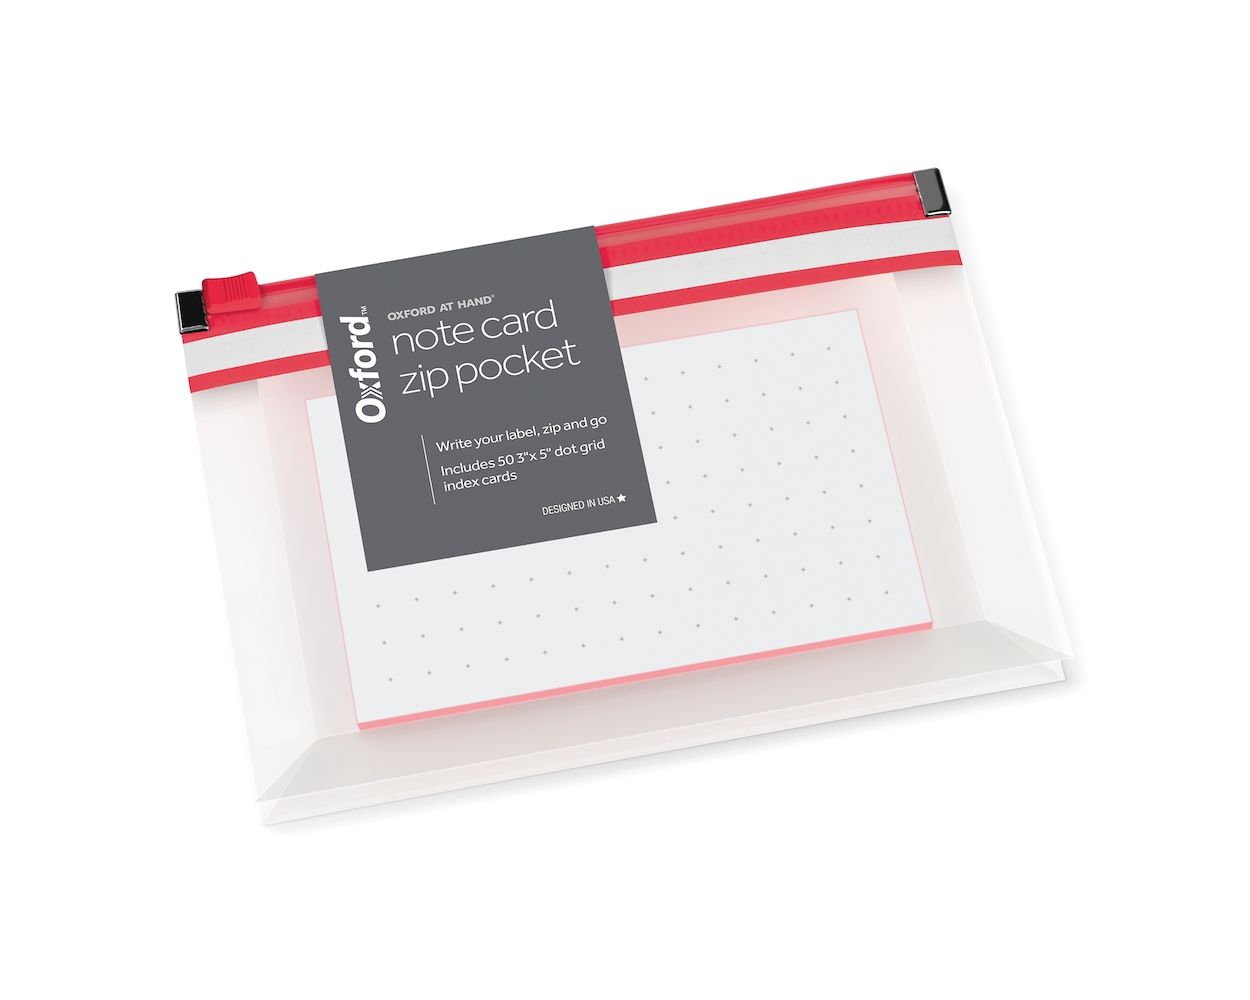 Oxford® At Hand Note Card Zip Pocket, 20 20" x 20" Dot Grid Cards With Regard To 3 By 5 Index Card Template